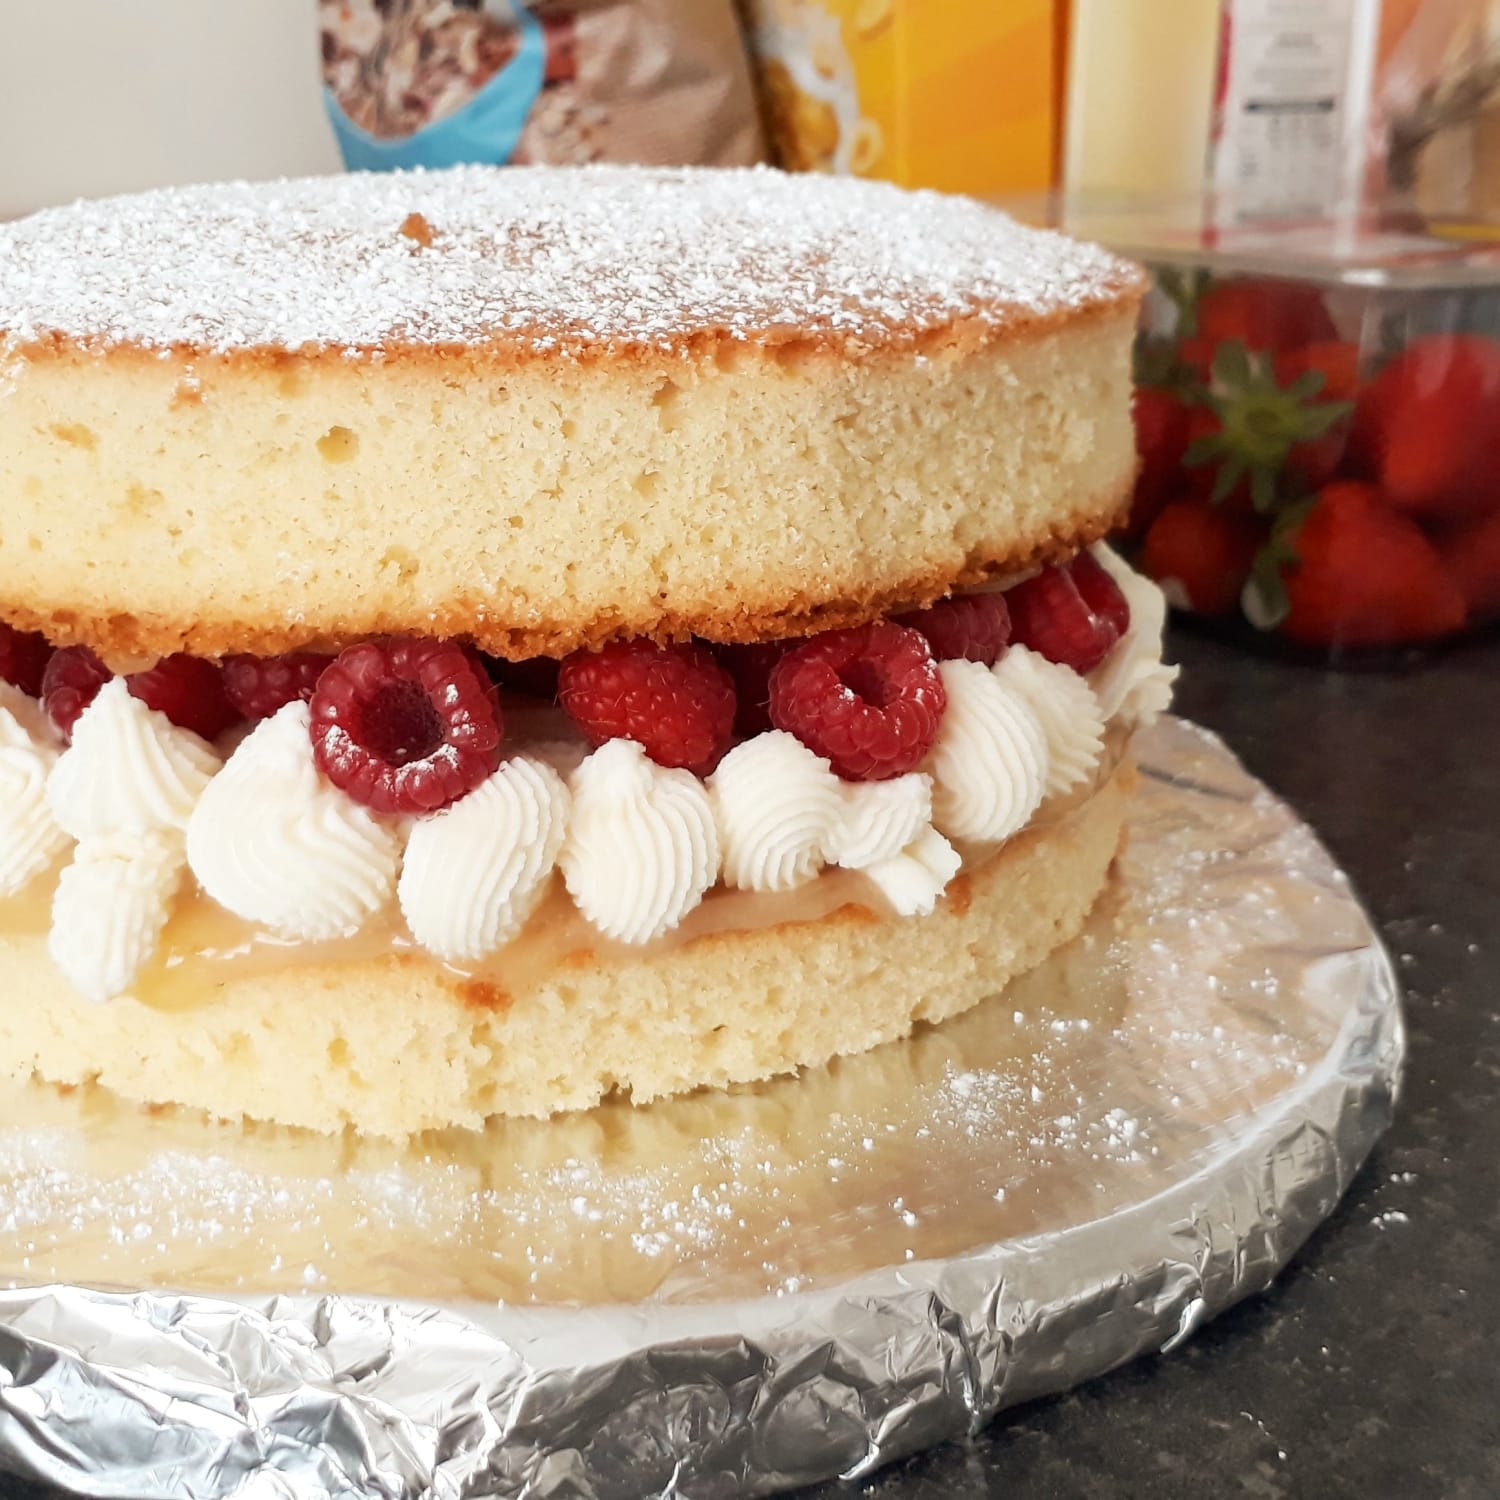 A different twist on the Victoria sponge: lemon curd, mascarpone icing, and raspberry filling